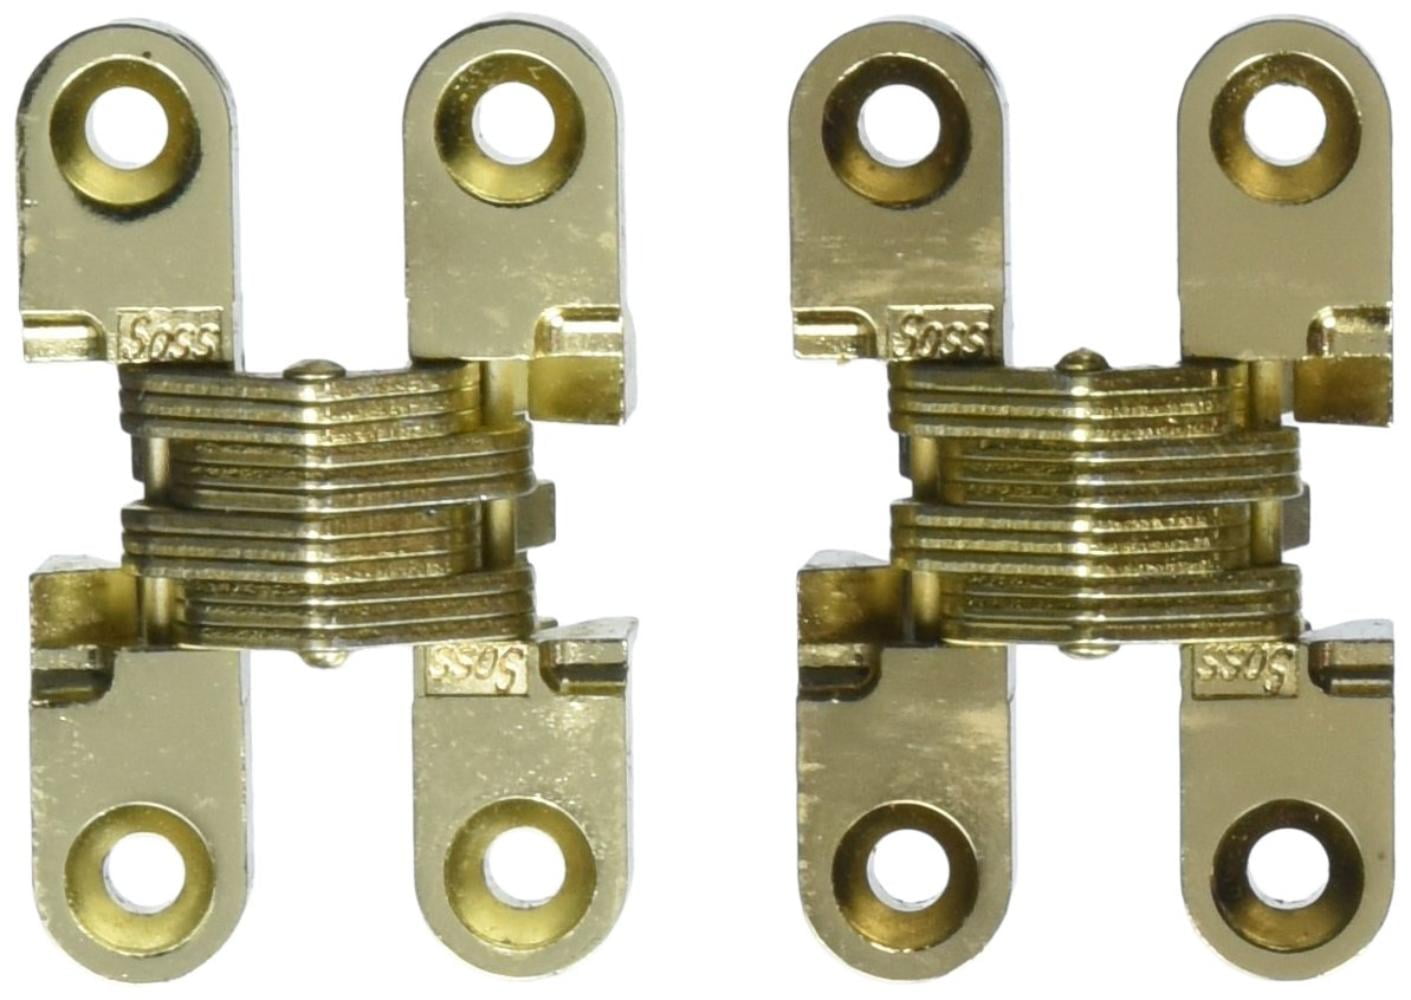 SOSS 101 Zinc Invisible Hinge with Holes for Wood or Metal Applications Mortise Mounting Satin Nickel Exterior Finish Pack of 2